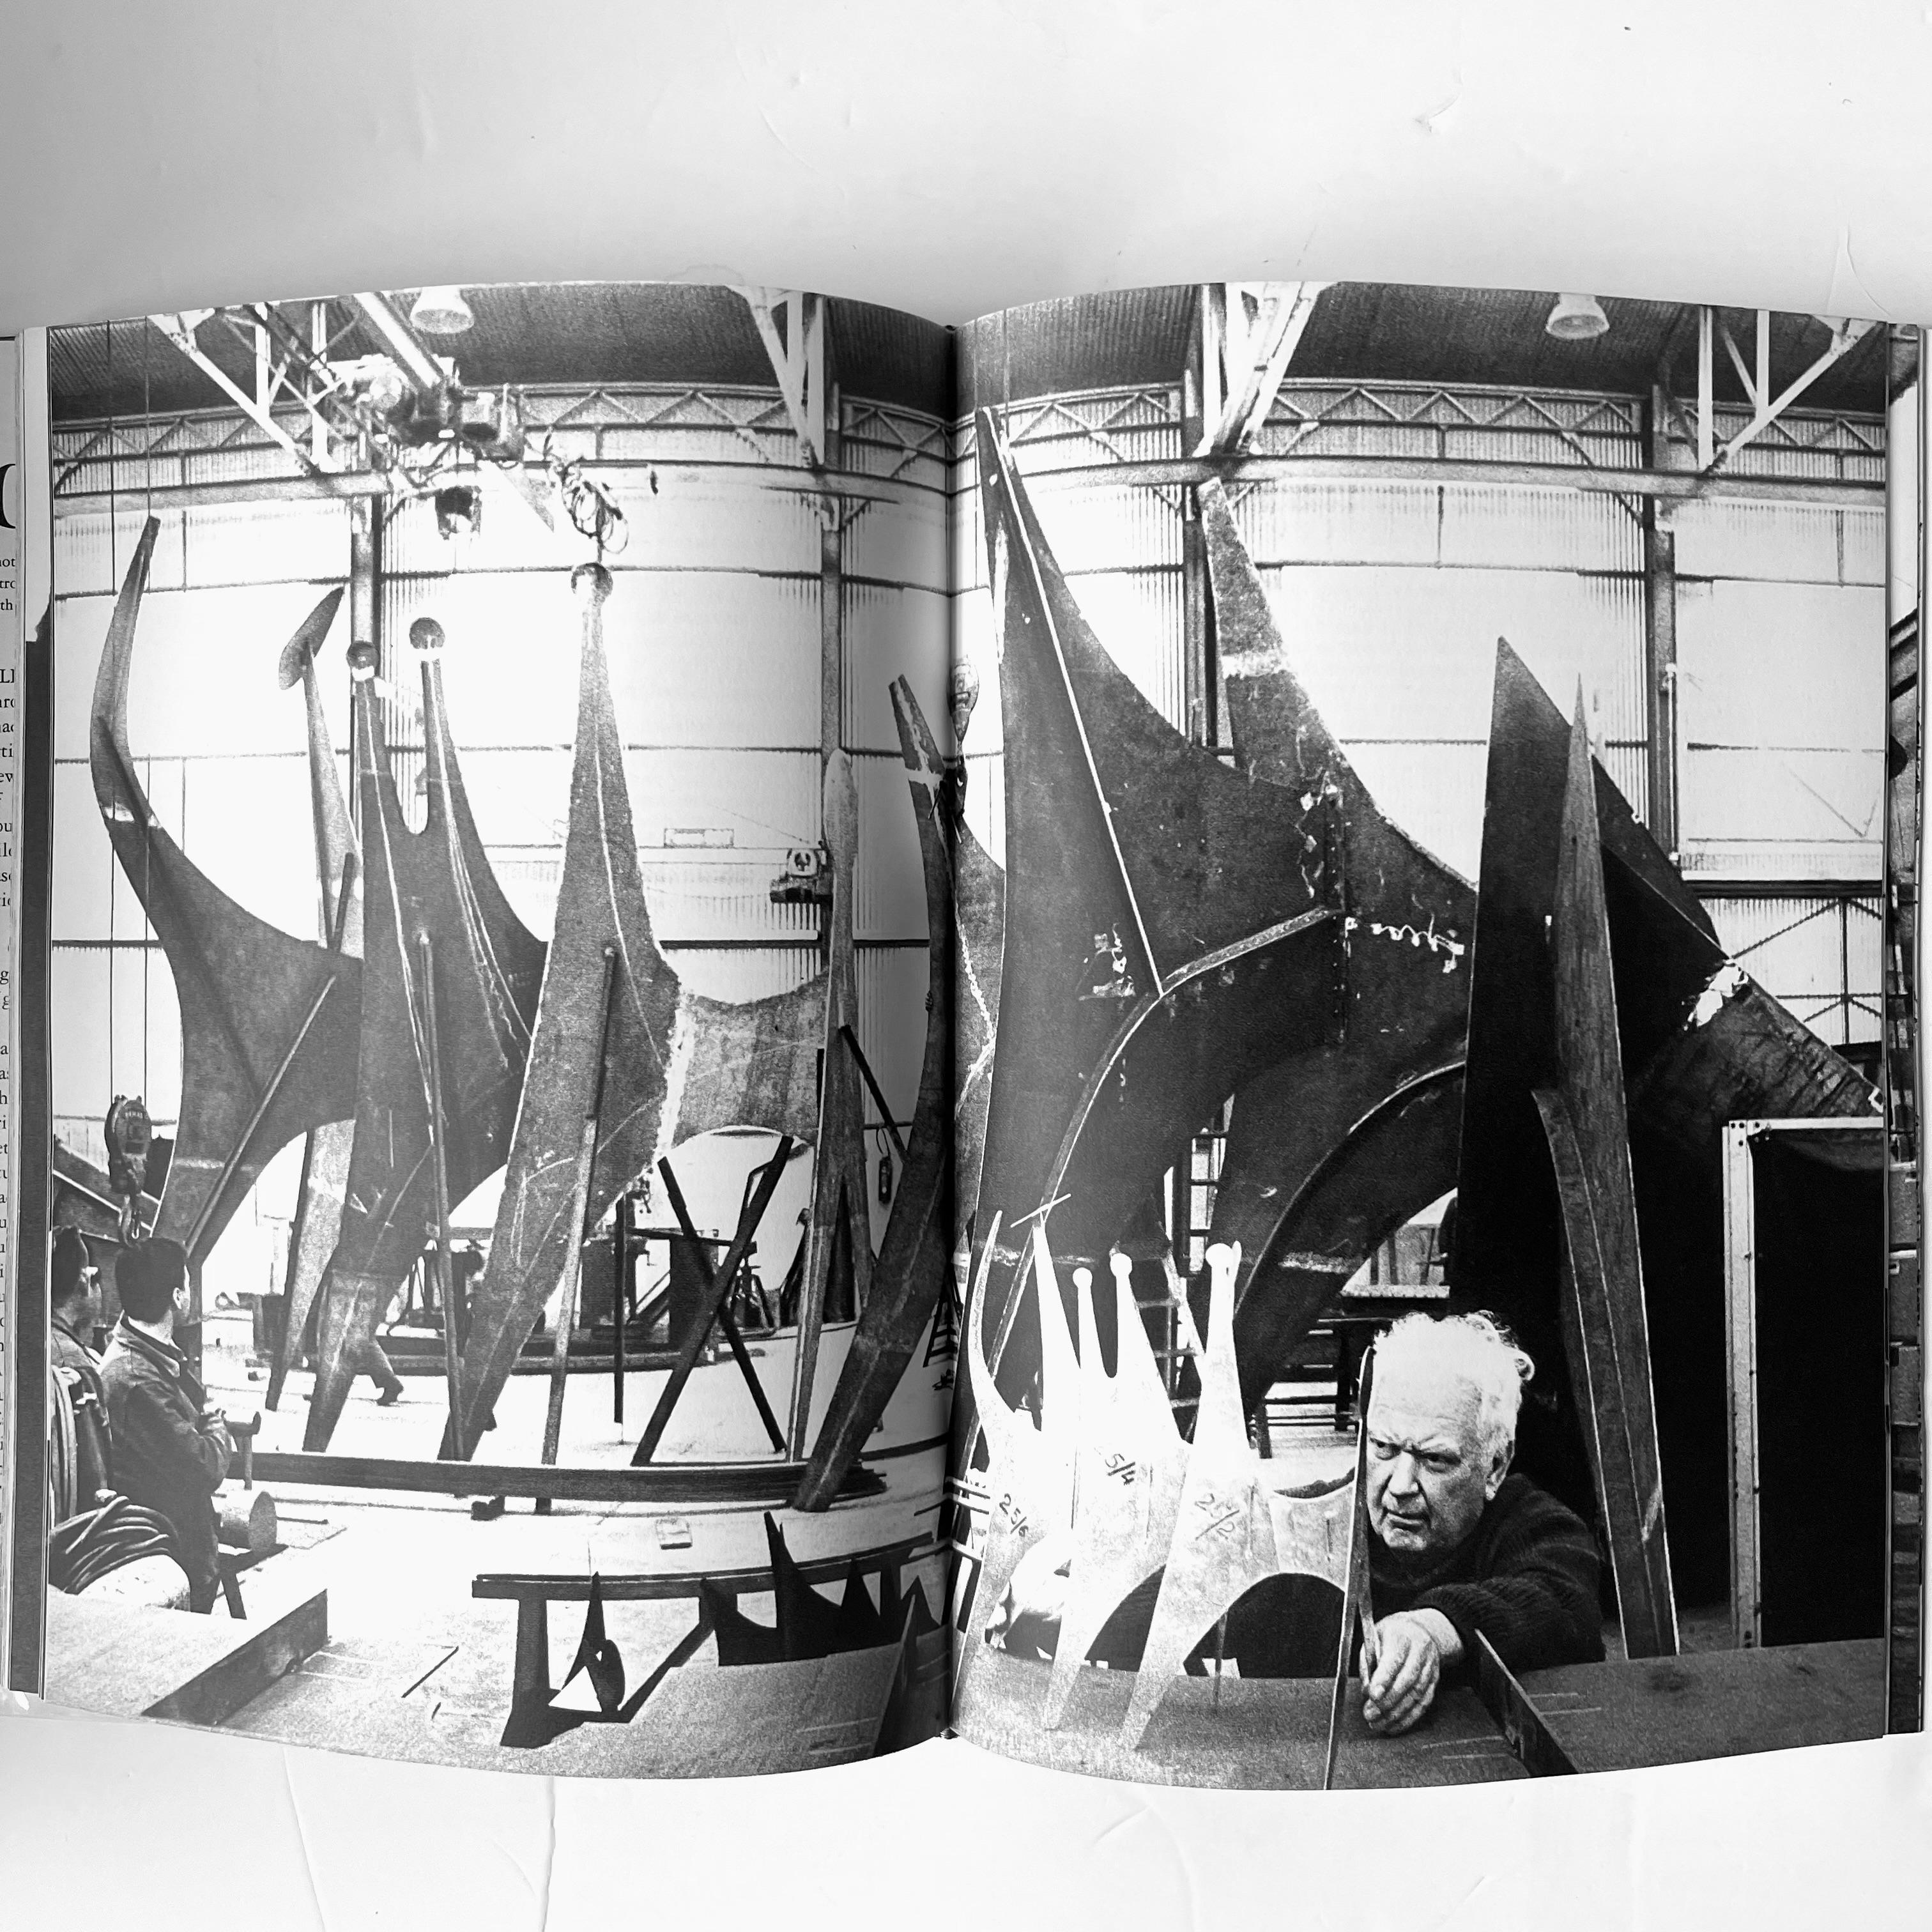 New York: Viking Press, 1971. Hardcover.

A crucial  book on Alexander Calder’s work and with his own comments The book presents a full survey of Calders  Mobiles, stabiles, wire and circus sculpture, gouaches, and theatrical design. 216 pages